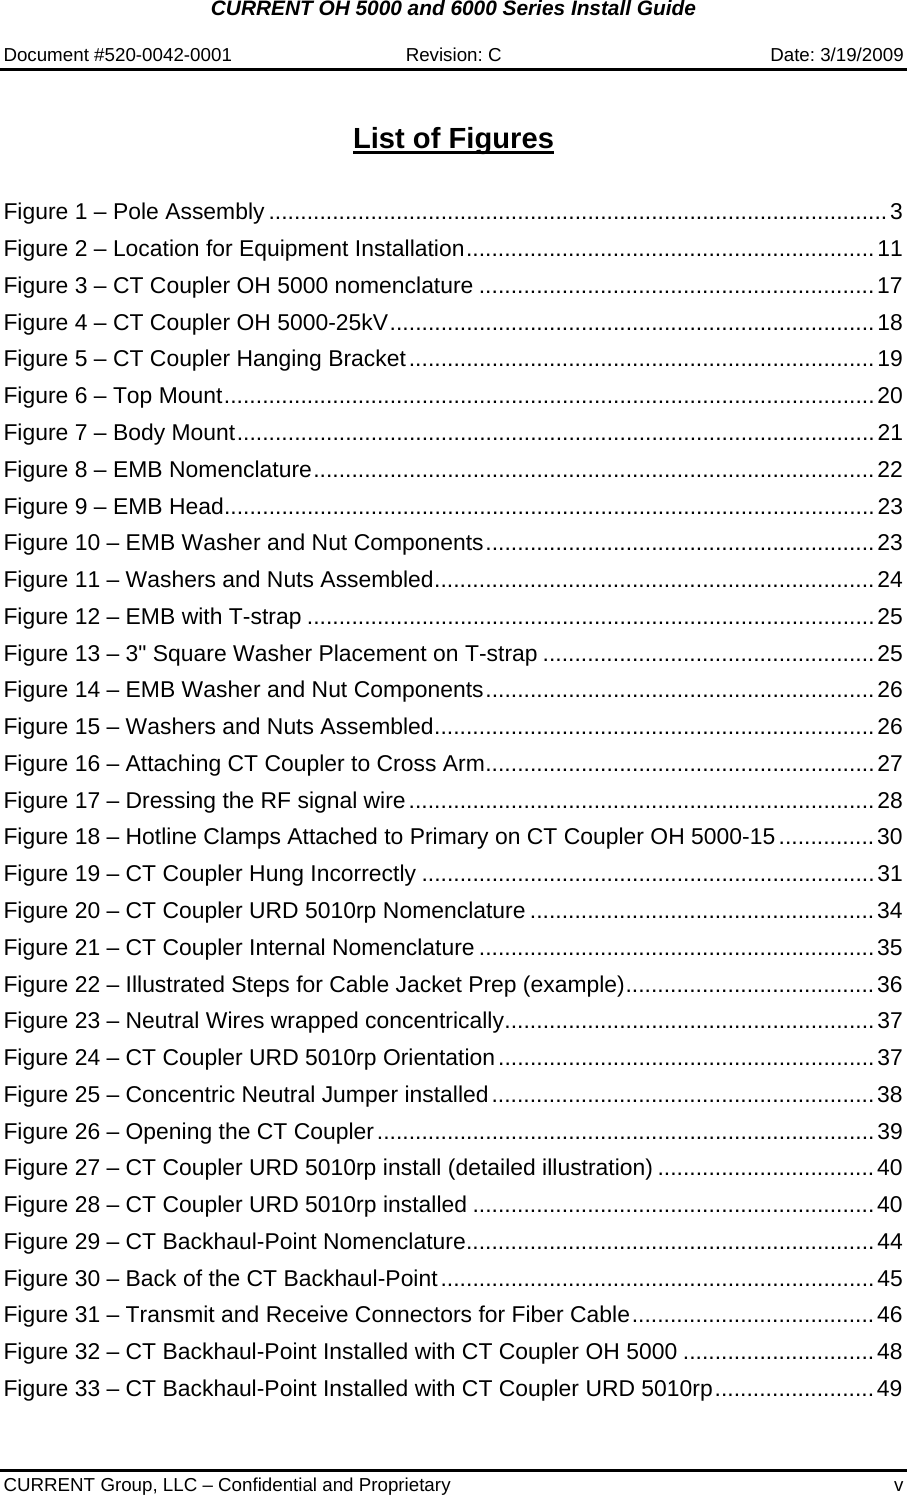 CURRENT OH 5000 and 6000 Series Install Guide  Document #520-0042-0001  Revision: C  Date: 3/19/2009  CURRENT Group, LLC – Confidential and Proprietary  v  List of Figures  Figure 1 – Pole Assembly .................................................................................................3 Figure 2 – Location for Equipment Installation................................................................11 Figure 3 – CT Coupler OH 5000 nomenclature ..............................................................17 Figure 4 – CT Coupler OH 5000-25kV............................................................................18 Figure 5 – CT Coupler Hanging Bracket.........................................................................19 Figure 6 – Top Mount......................................................................................................20 Figure 7 – Body Mount....................................................................................................21 Figure 8 – EMB Nomenclature........................................................................................22 Figure 9 – EMB Head......................................................................................................23 Figure 10 – EMB Washer and Nut Components.............................................................23 Figure 11 – Washers and Nuts Assembled.....................................................................24 Figure 12 – EMB with T-strap .........................................................................................25 Figure 13 – 3&quot; Square Washer Placement on T-strap ....................................................25 Figure 14 – EMB Washer and Nut Components.............................................................26 Figure 15 – Washers and Nuts Assembled.....................................................................26 Figure 16 – Attaching CT Coupler to Cross Arm.............................................................27 Figure 17 – Dressing the RF signal wire.........................................................................28 Figure 18 – Hotline Clamps Attached to Primary on CT Coupler OH 5000-15...............30 Figure 19 – CT Coupler Hung Incorrectly .......................................................................31 Figure 20 – CT Coupler URD 5010rp Nomenclature ......................................................34 Figure 21 – CT Coupler Internal Nomenclature ..............................................................35 Figure 22 – Illustrated Steps for Cable Jacket Prep (example).......................................36 Figure 23 – Neutral Wires wrapped concentrically..........................................................37 Figure 24 – CT Coupler URD 5010rp Orientation...........................................................37 Figure 25 – Concentric Neutral Jumper installed............................................................38 Figure 26 – Opening the CT Coupler..............................................................................39 Figure 27 – CT Coupler URD 5010rp install (detailed illustration) ..................................40 Figure 28 – CT Coupler URD 5010rp installed ...............................................................40 Figure 29 – CT Backhaul-Point Nomenclature................................................................44 Figure 30 – Back of the CT Backhaul-Point....................................................................45 Figure 31 – Transmit and Receive Connectors for Fiber Cable......................................46 Figure 32 – CT Backhaul-Point Installed with CT Coupler OH 5000 ..............................48 Figure 33 – CT Backhaul-Point Installed with CT Coupler URD 5010rp.........................49 